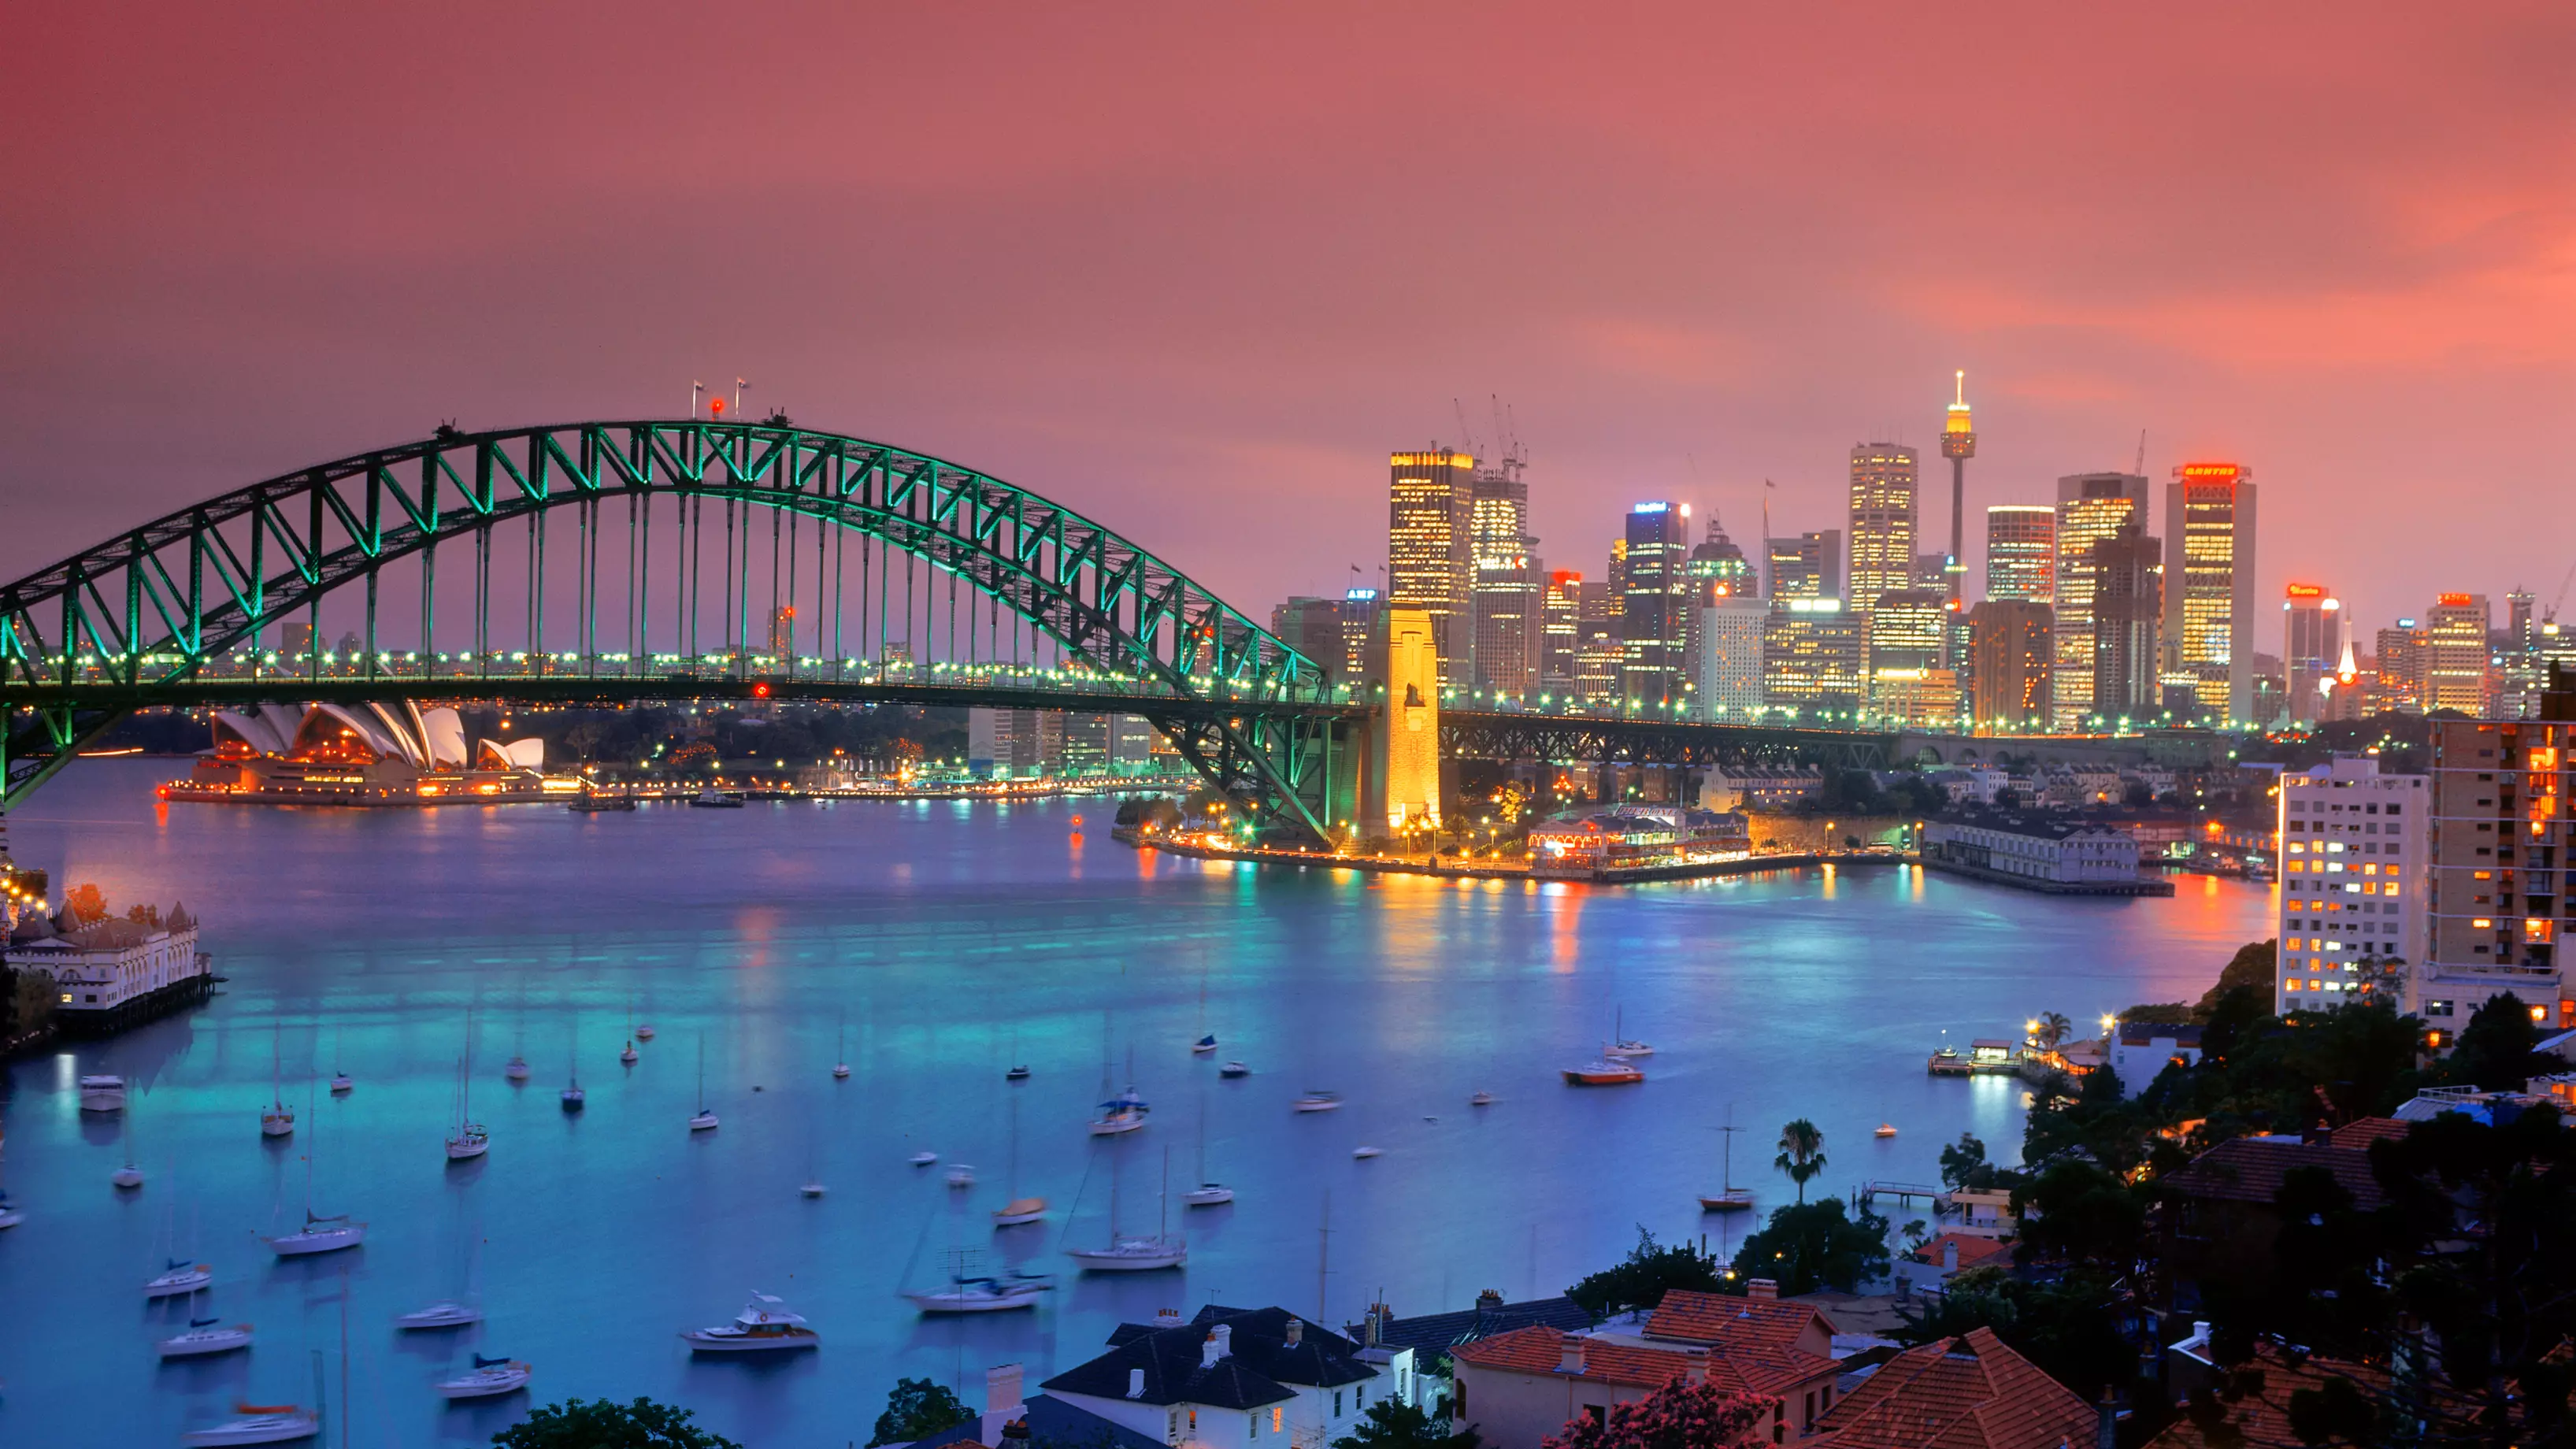 Qantas Is Offering Flights From London To Sydney For £205 Return